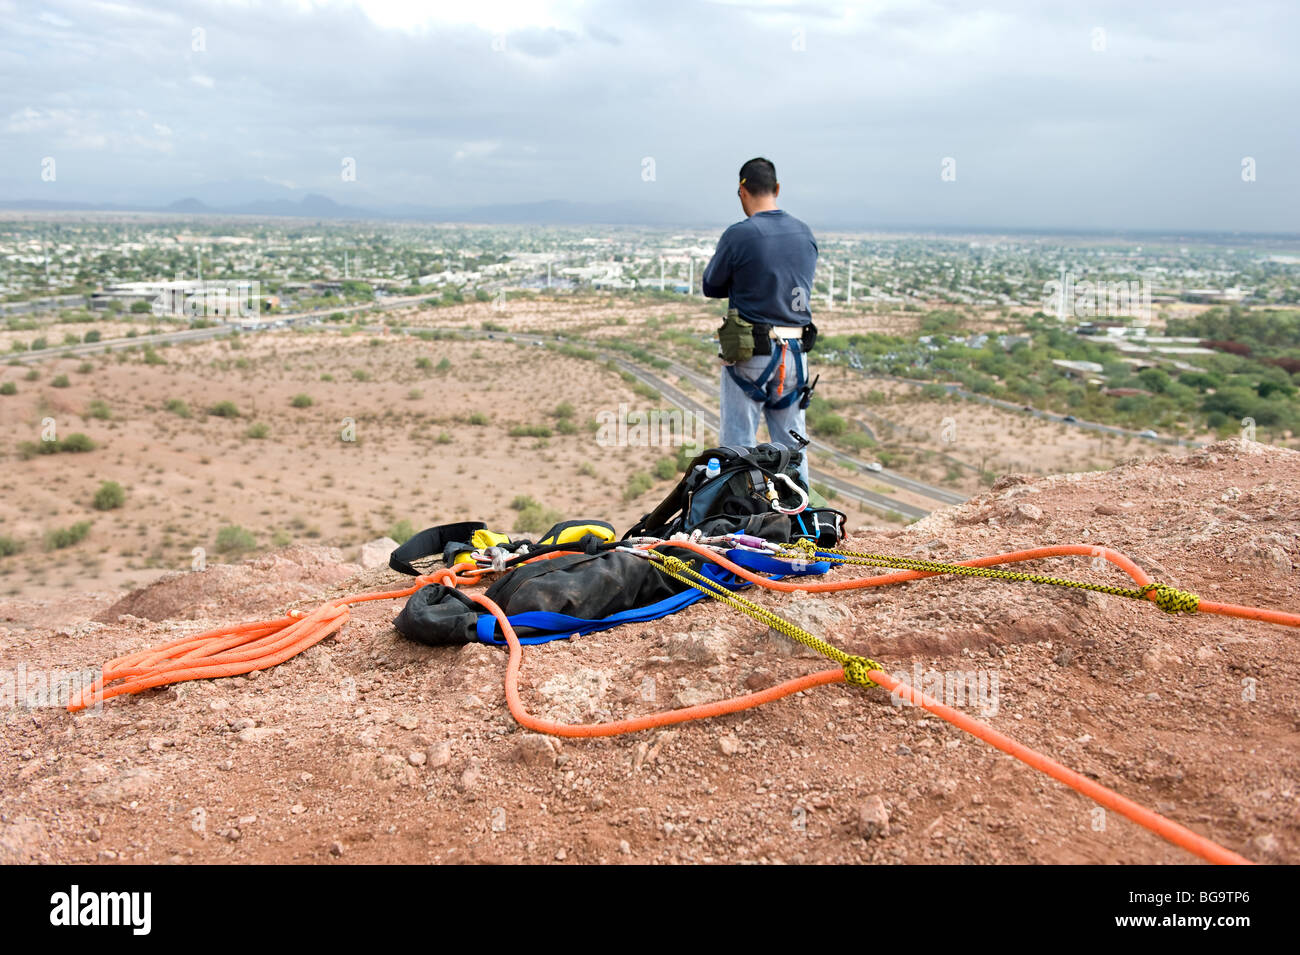 A rock climber, overlooking a far away city, gets ready to rappel down a steep and high mountaintop and thinks through his plan. Stock Photo